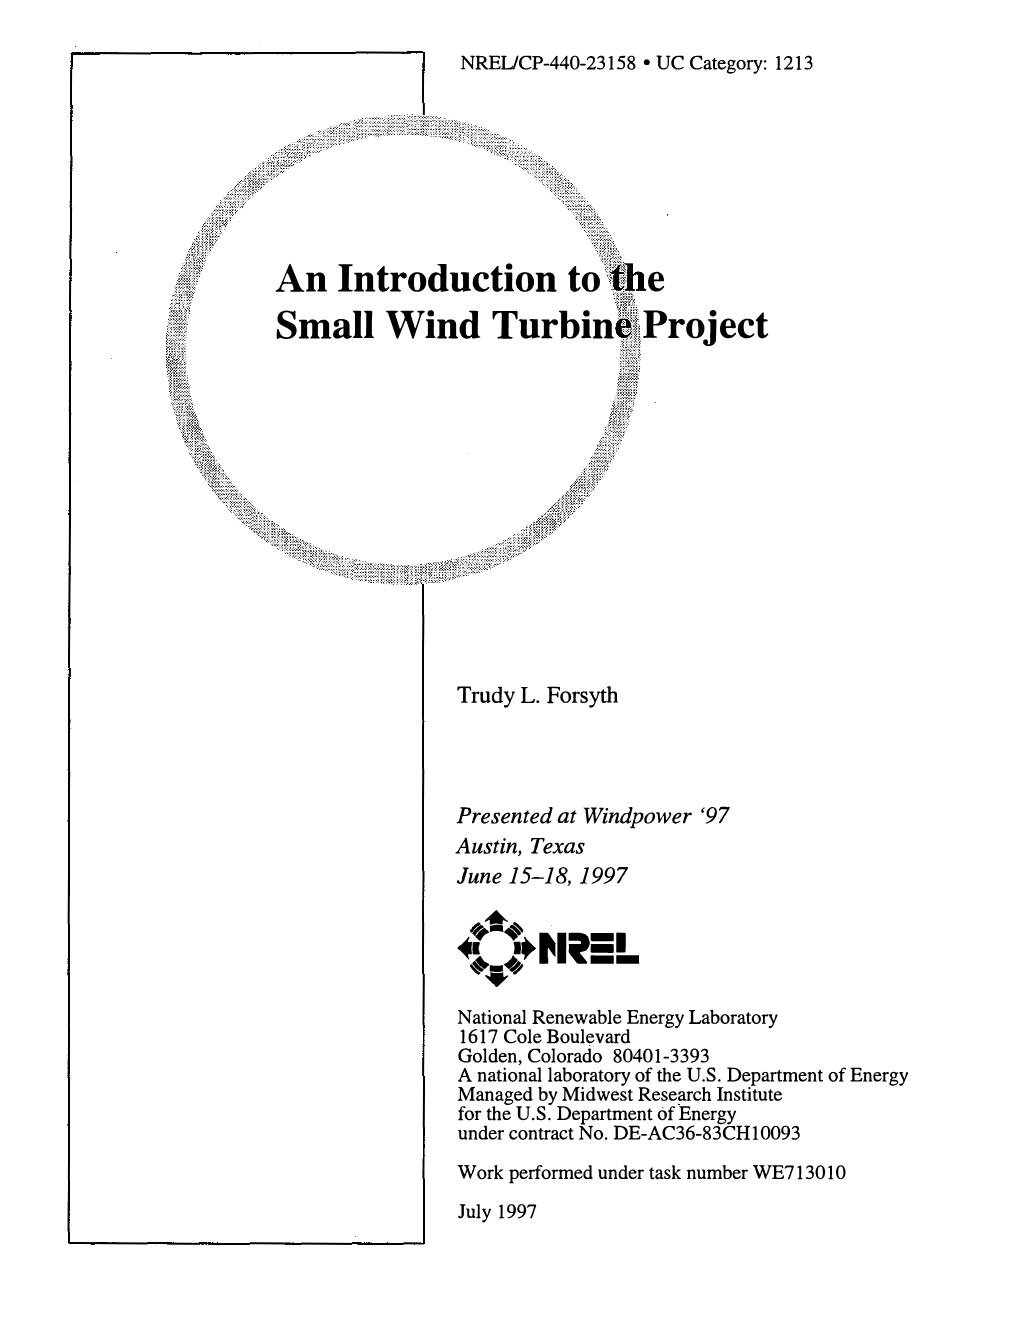 An Introduction to the Small Wind Turbine Project